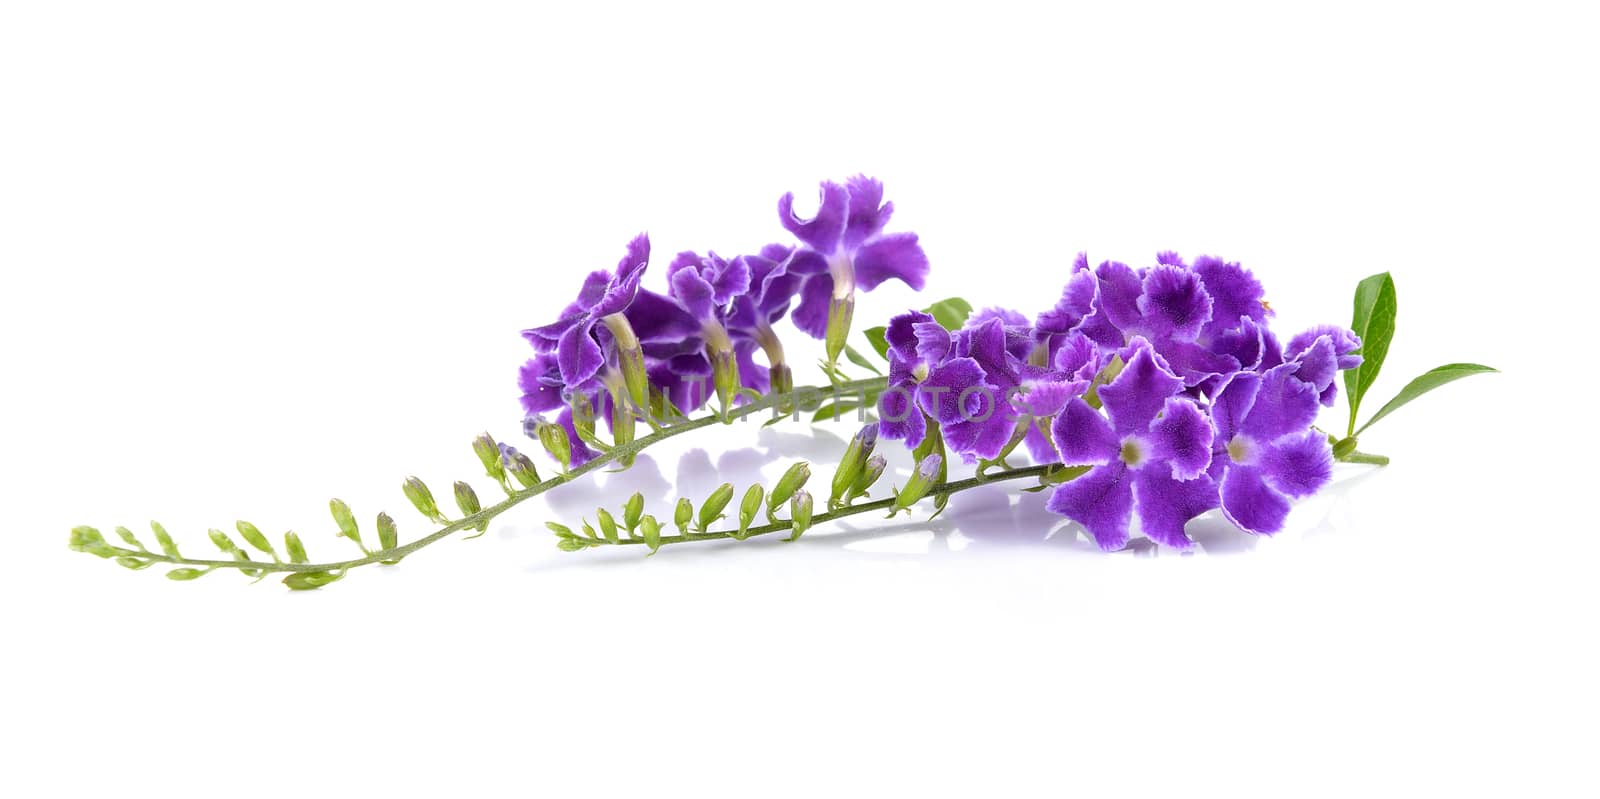 Purple flowers on white background by sommai